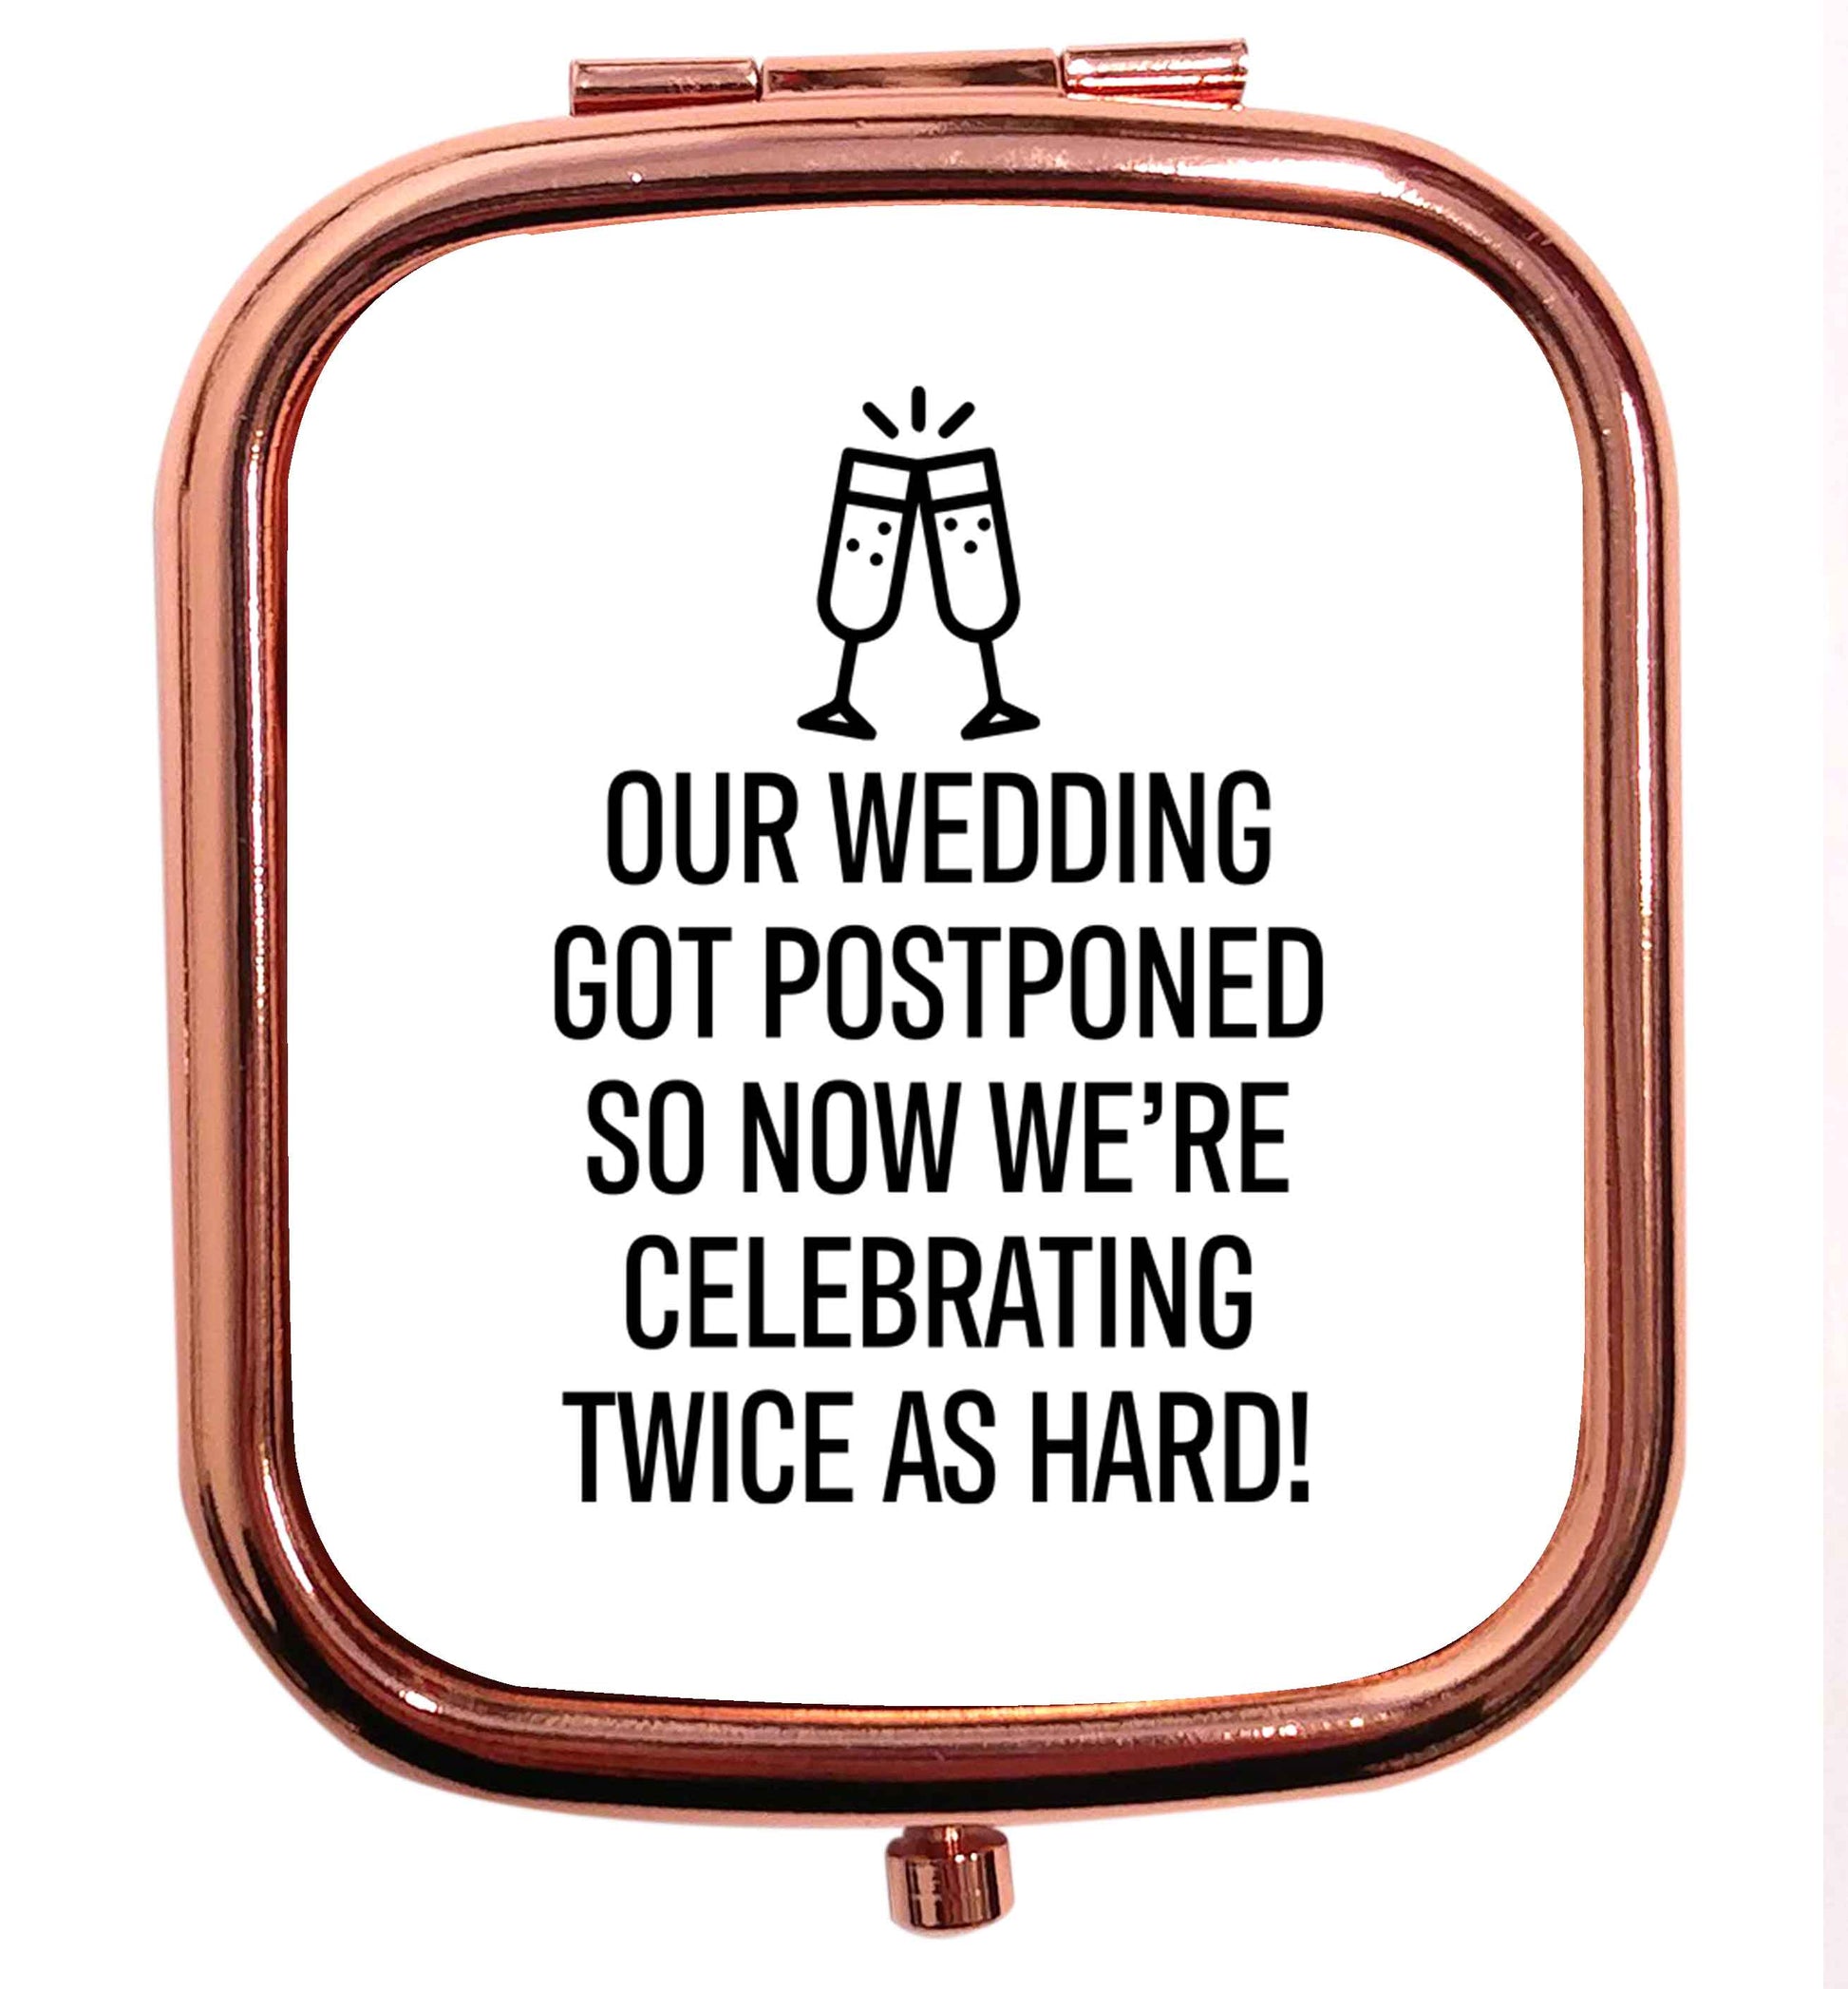 Postponed wedding? Sounds like an excuse to party twice as hard!  rose gold square pocket mirror